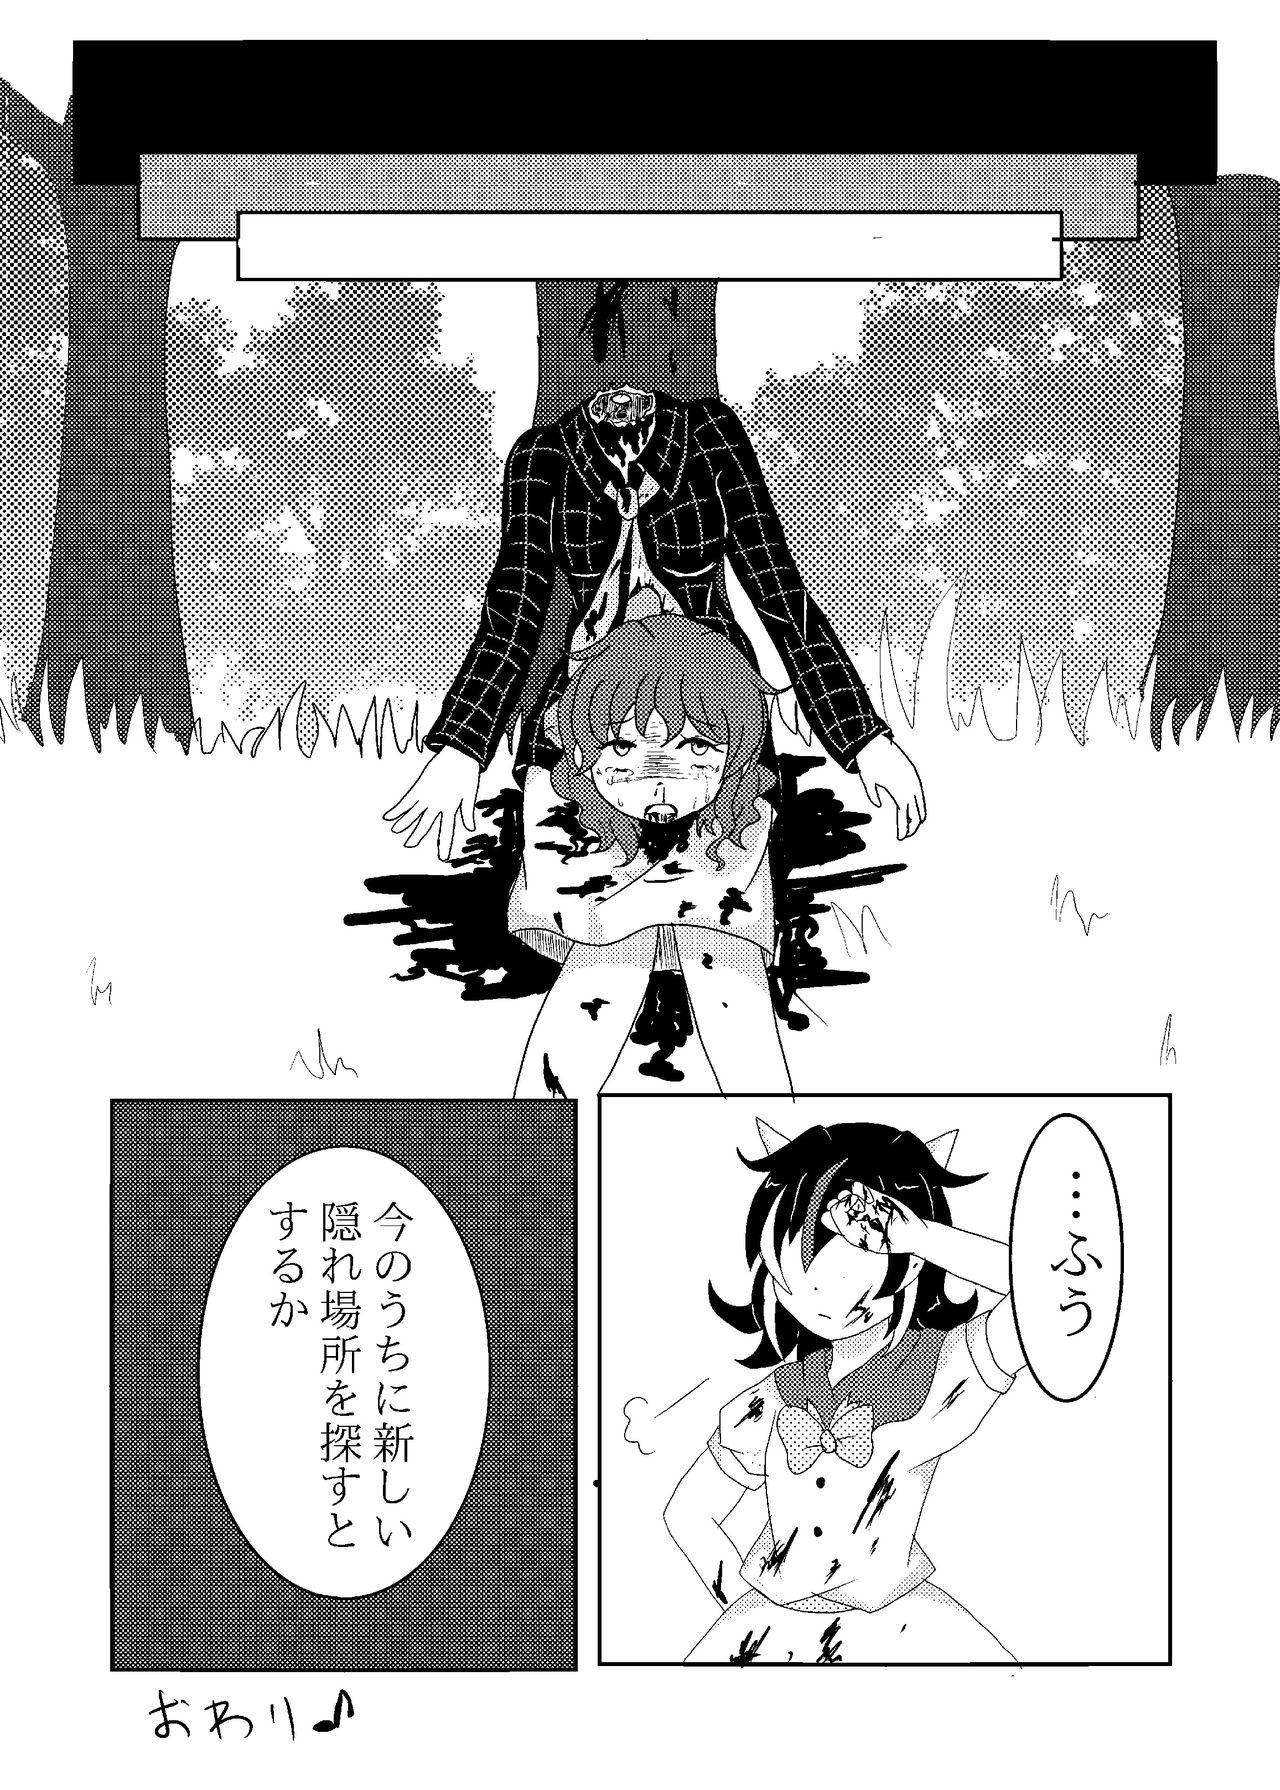 Cojiendo IN THE RIGHT WAY - Touhou project Best Blowjob Ever - Page 8